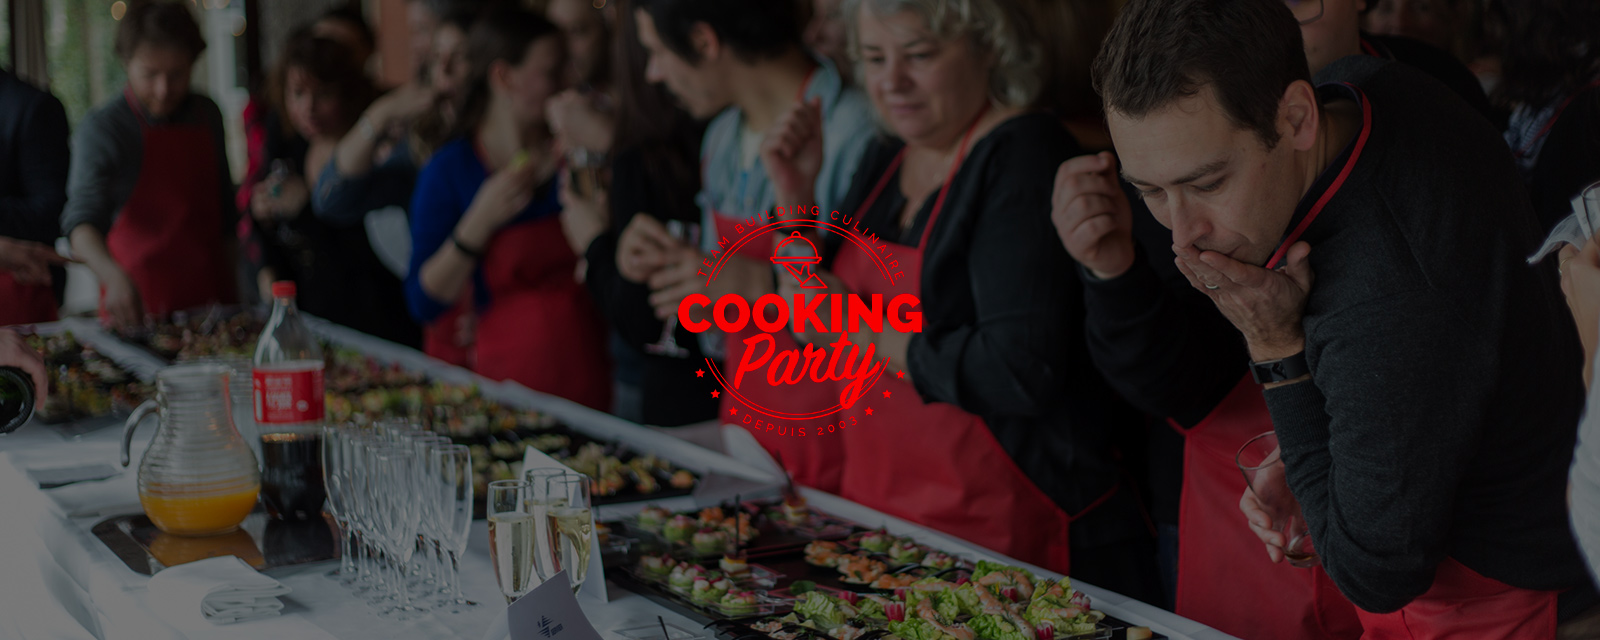 Cooking party incentive culinaire